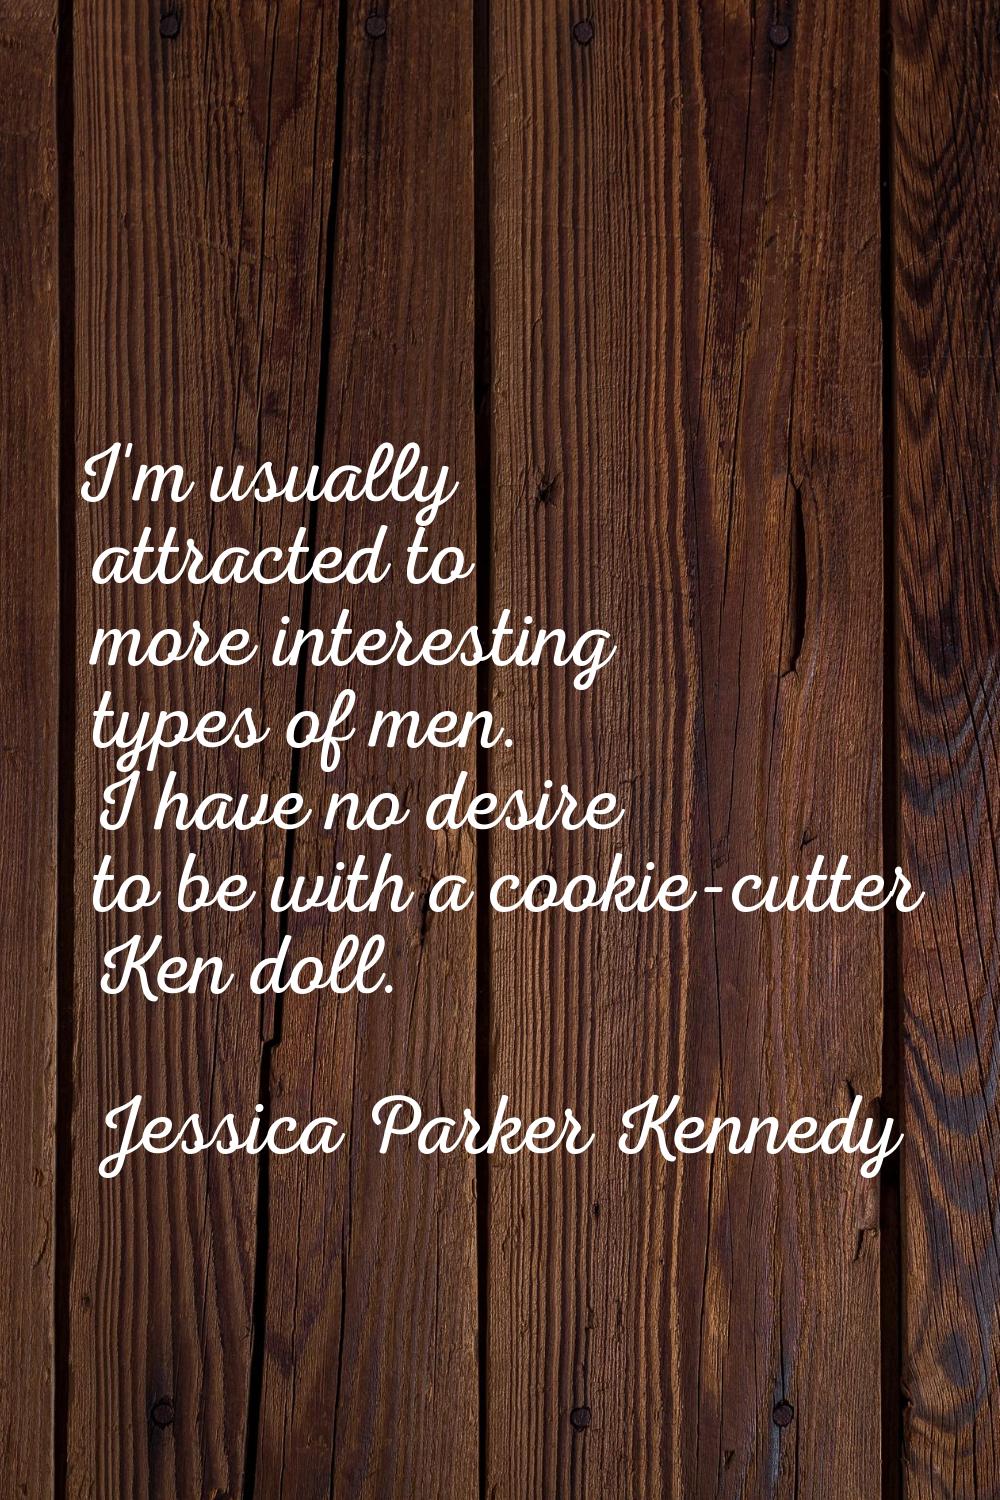 I'm usually attracted to more interesting types of men. I have no desire to be with a cookie-cutter